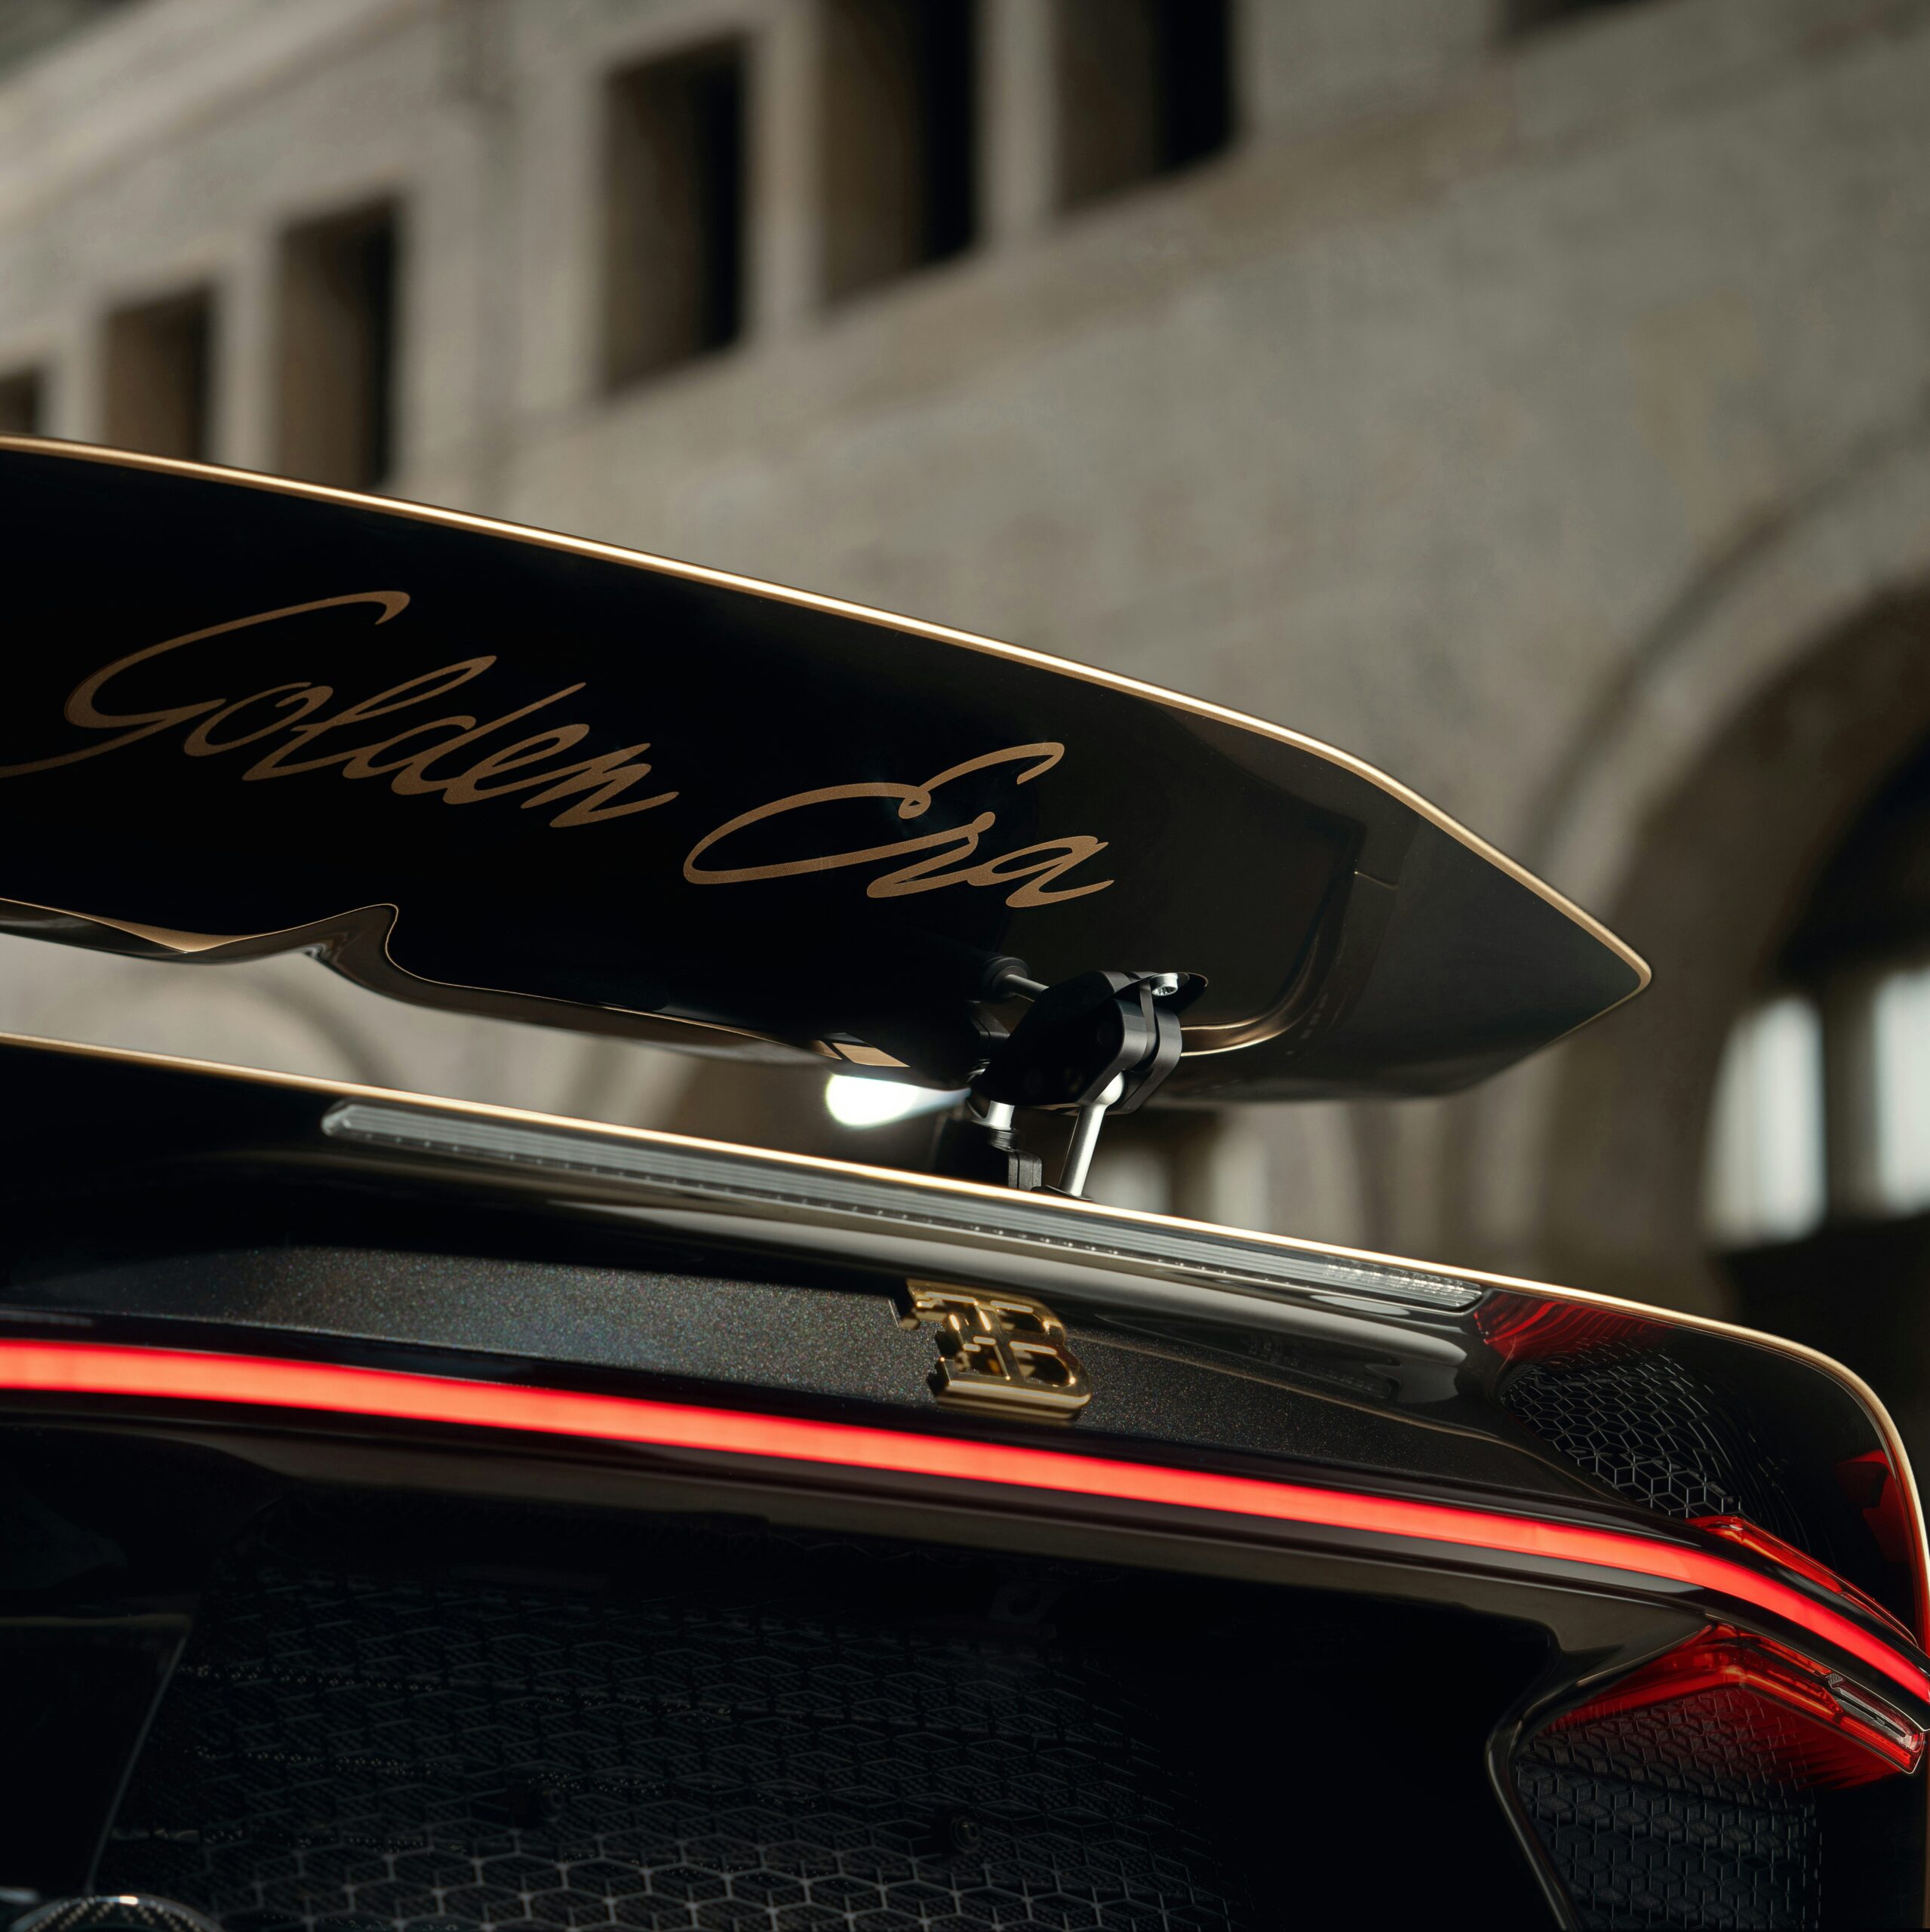 Bugatti debuted the one-of-one Chiron Super Sport “Golden Era,” which celebrates the incomparable legacy of the French marque via 360 MAGAZINE. 